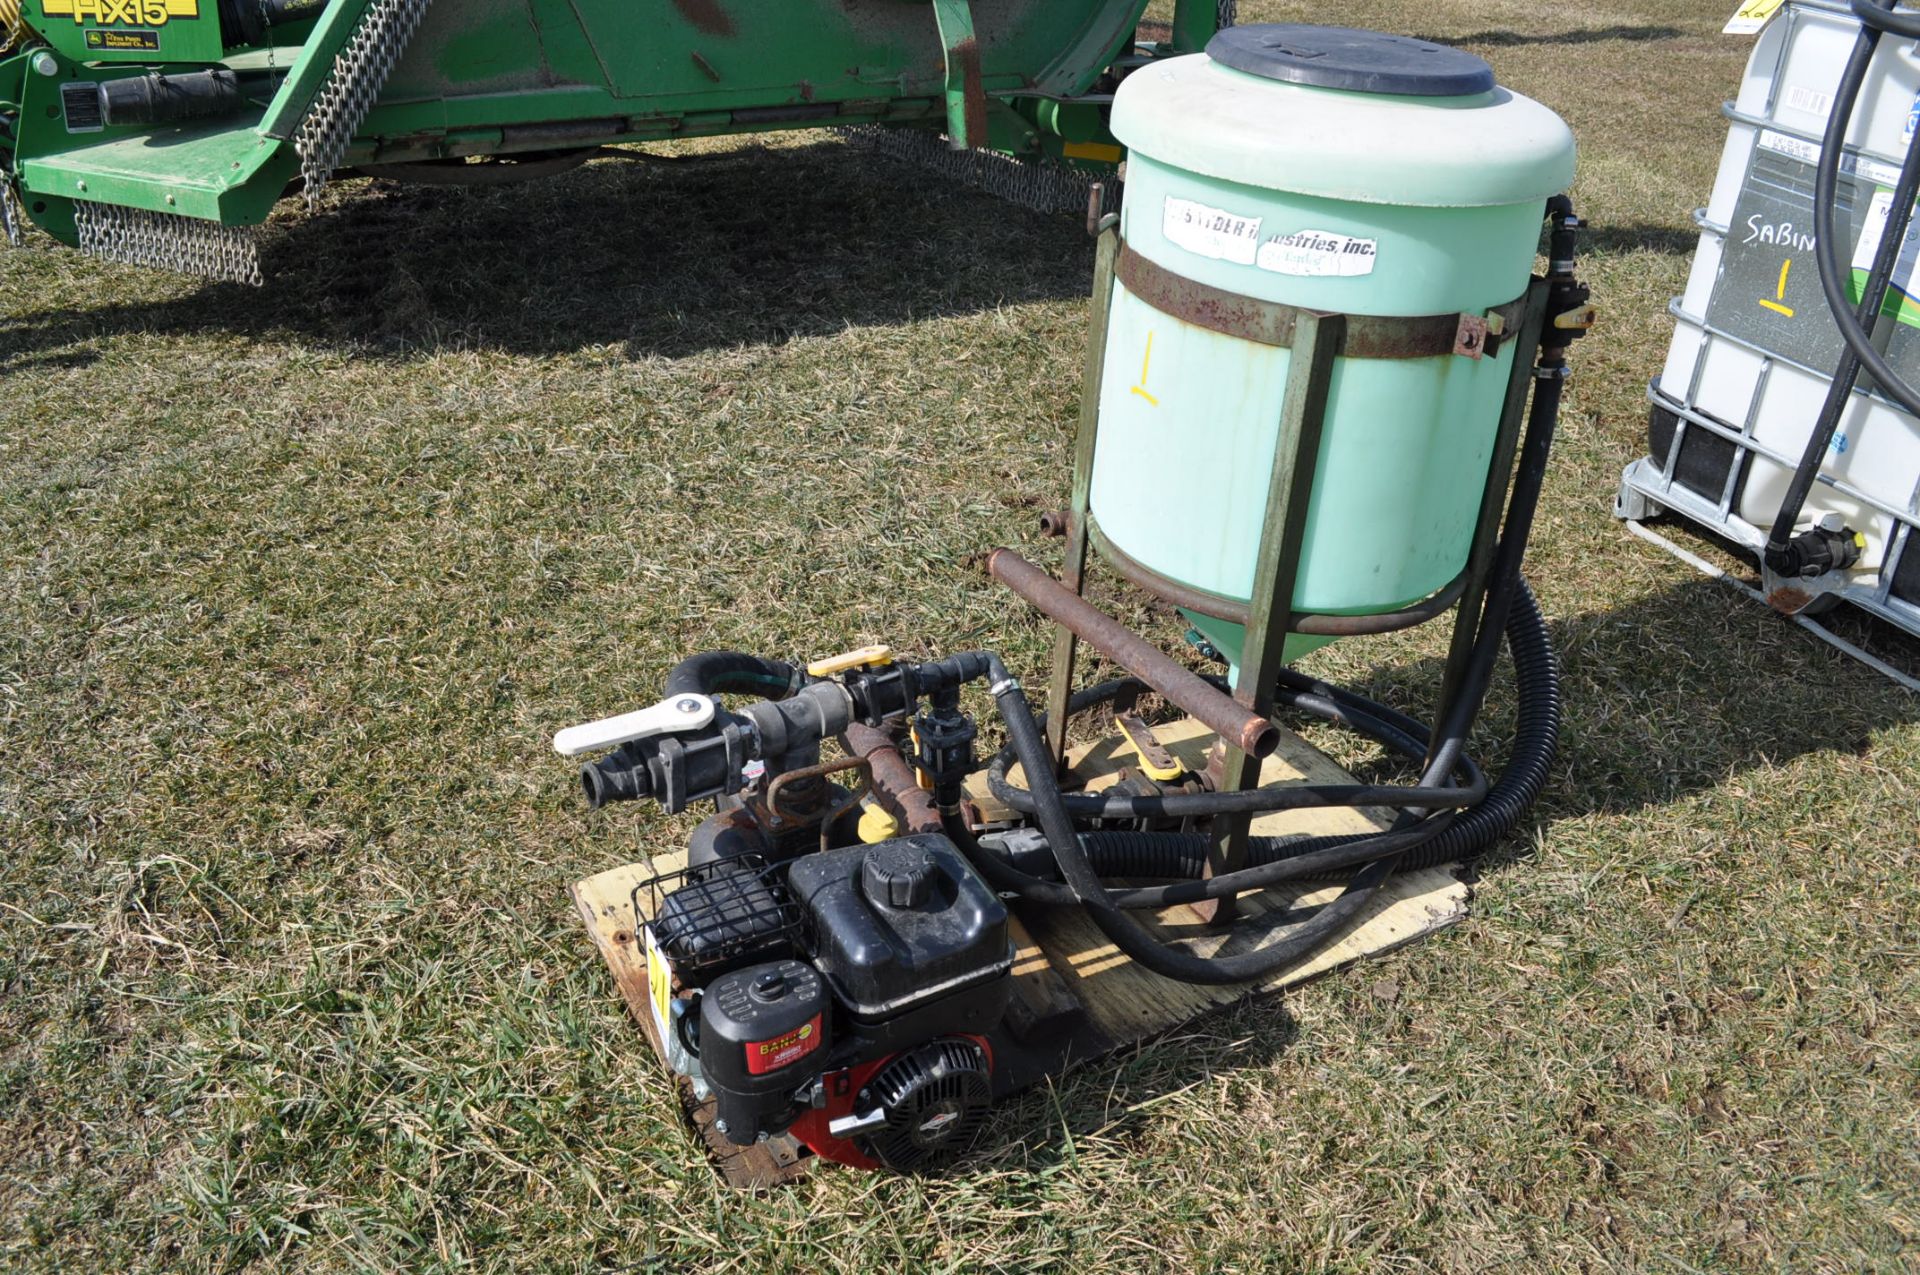 Banjo 2” cast pump with Briggs and Stratton engine, 35 gal inductor tanks with hose and stand